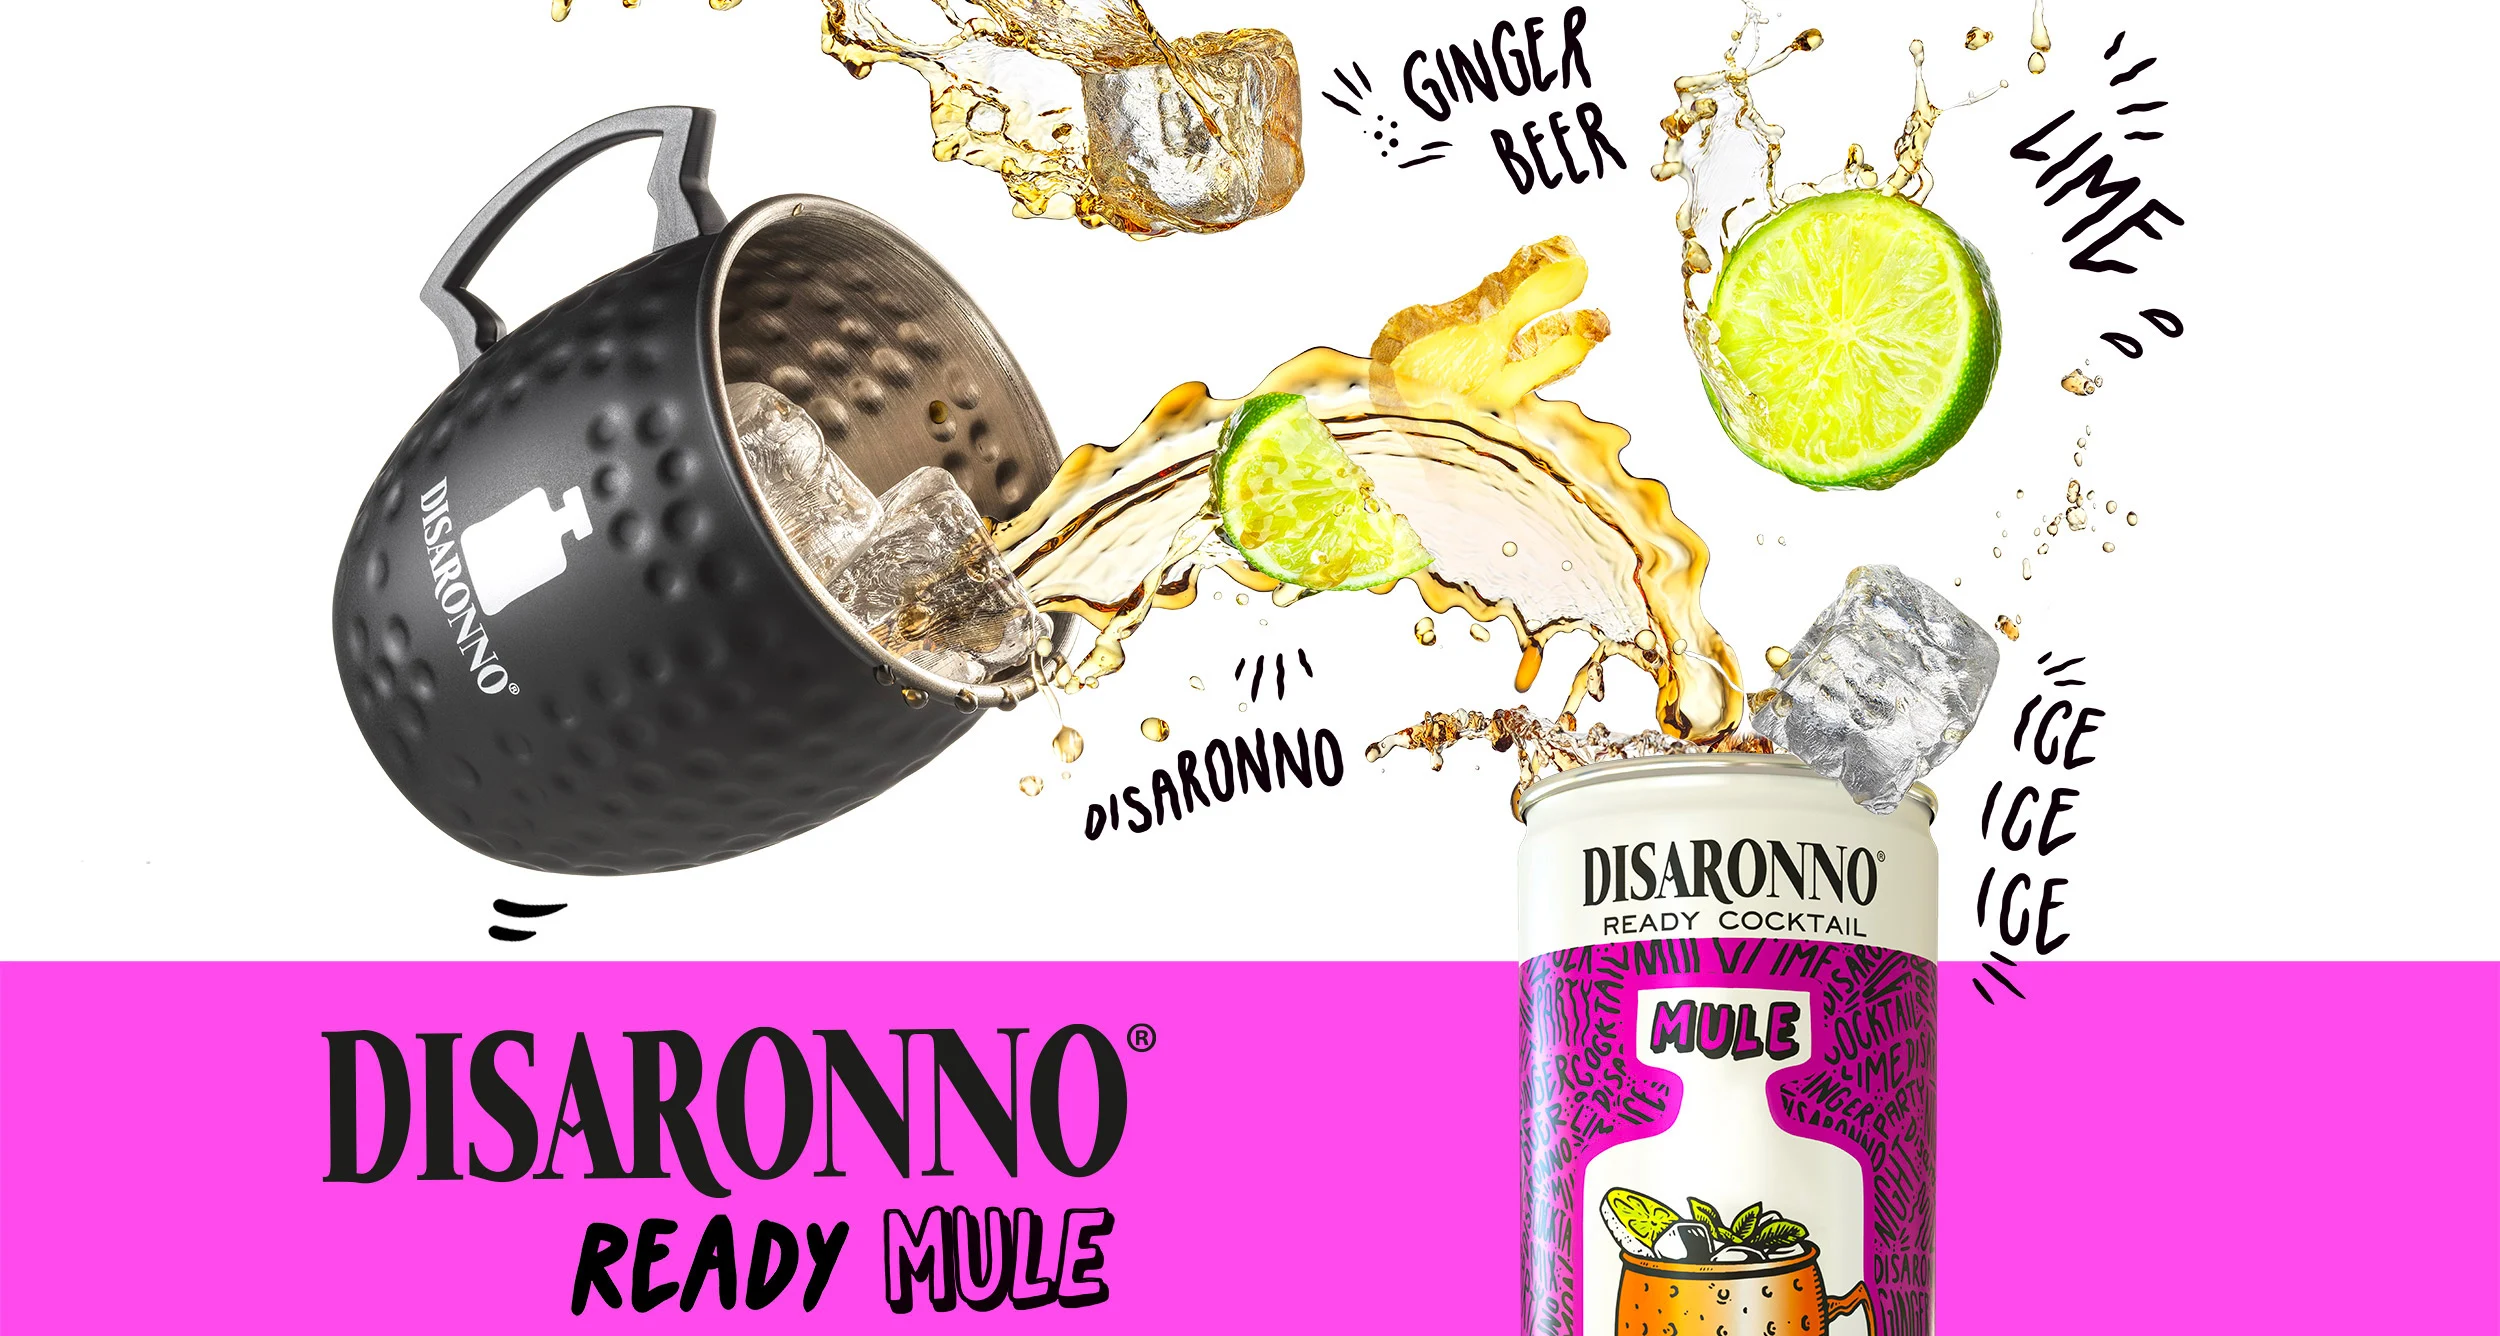 image from the brand identity project realized for Disaronno Ready Cocktail by Antiorario Creative Agency